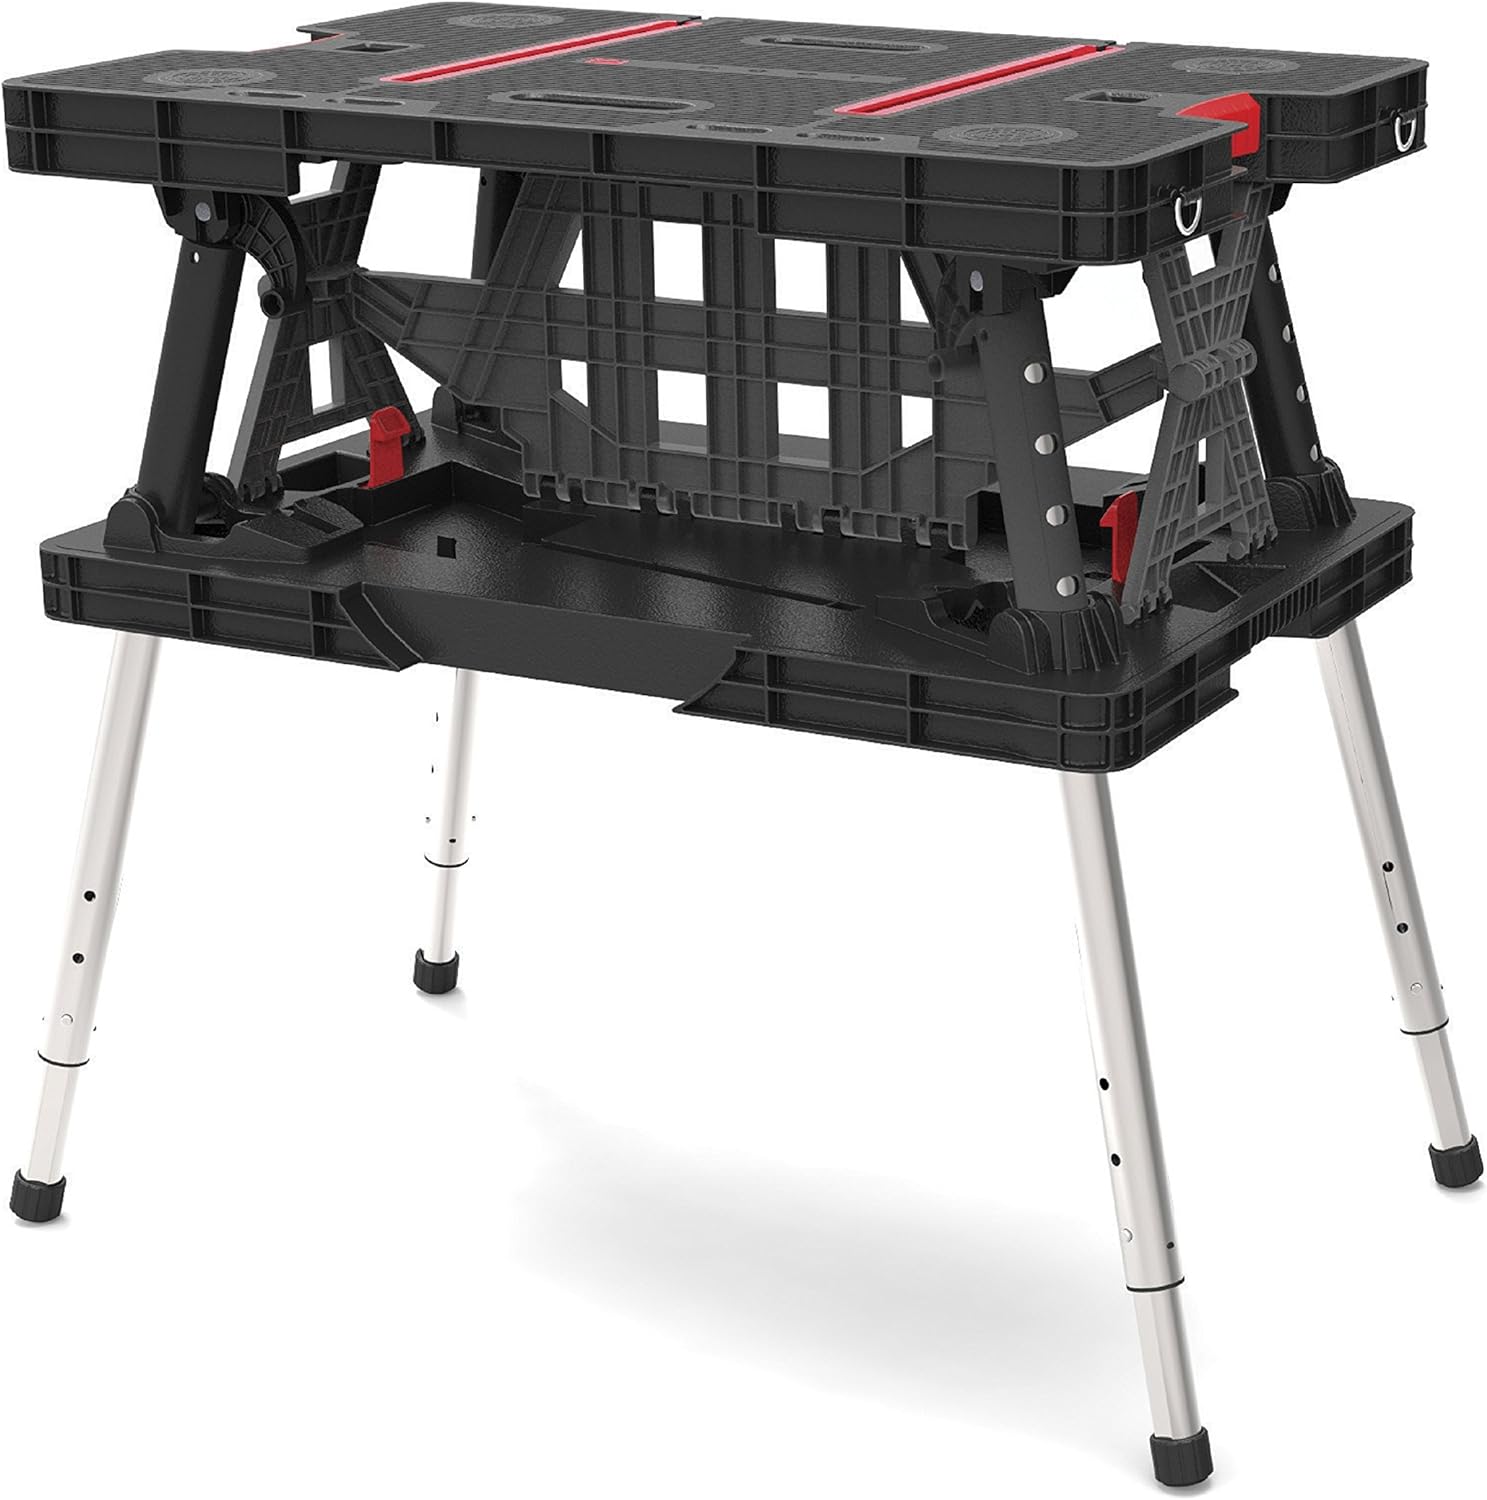 Keter Folding Compact Adjustable Workbench Sawhorse Work Table with Clamps 700 lb Capacity